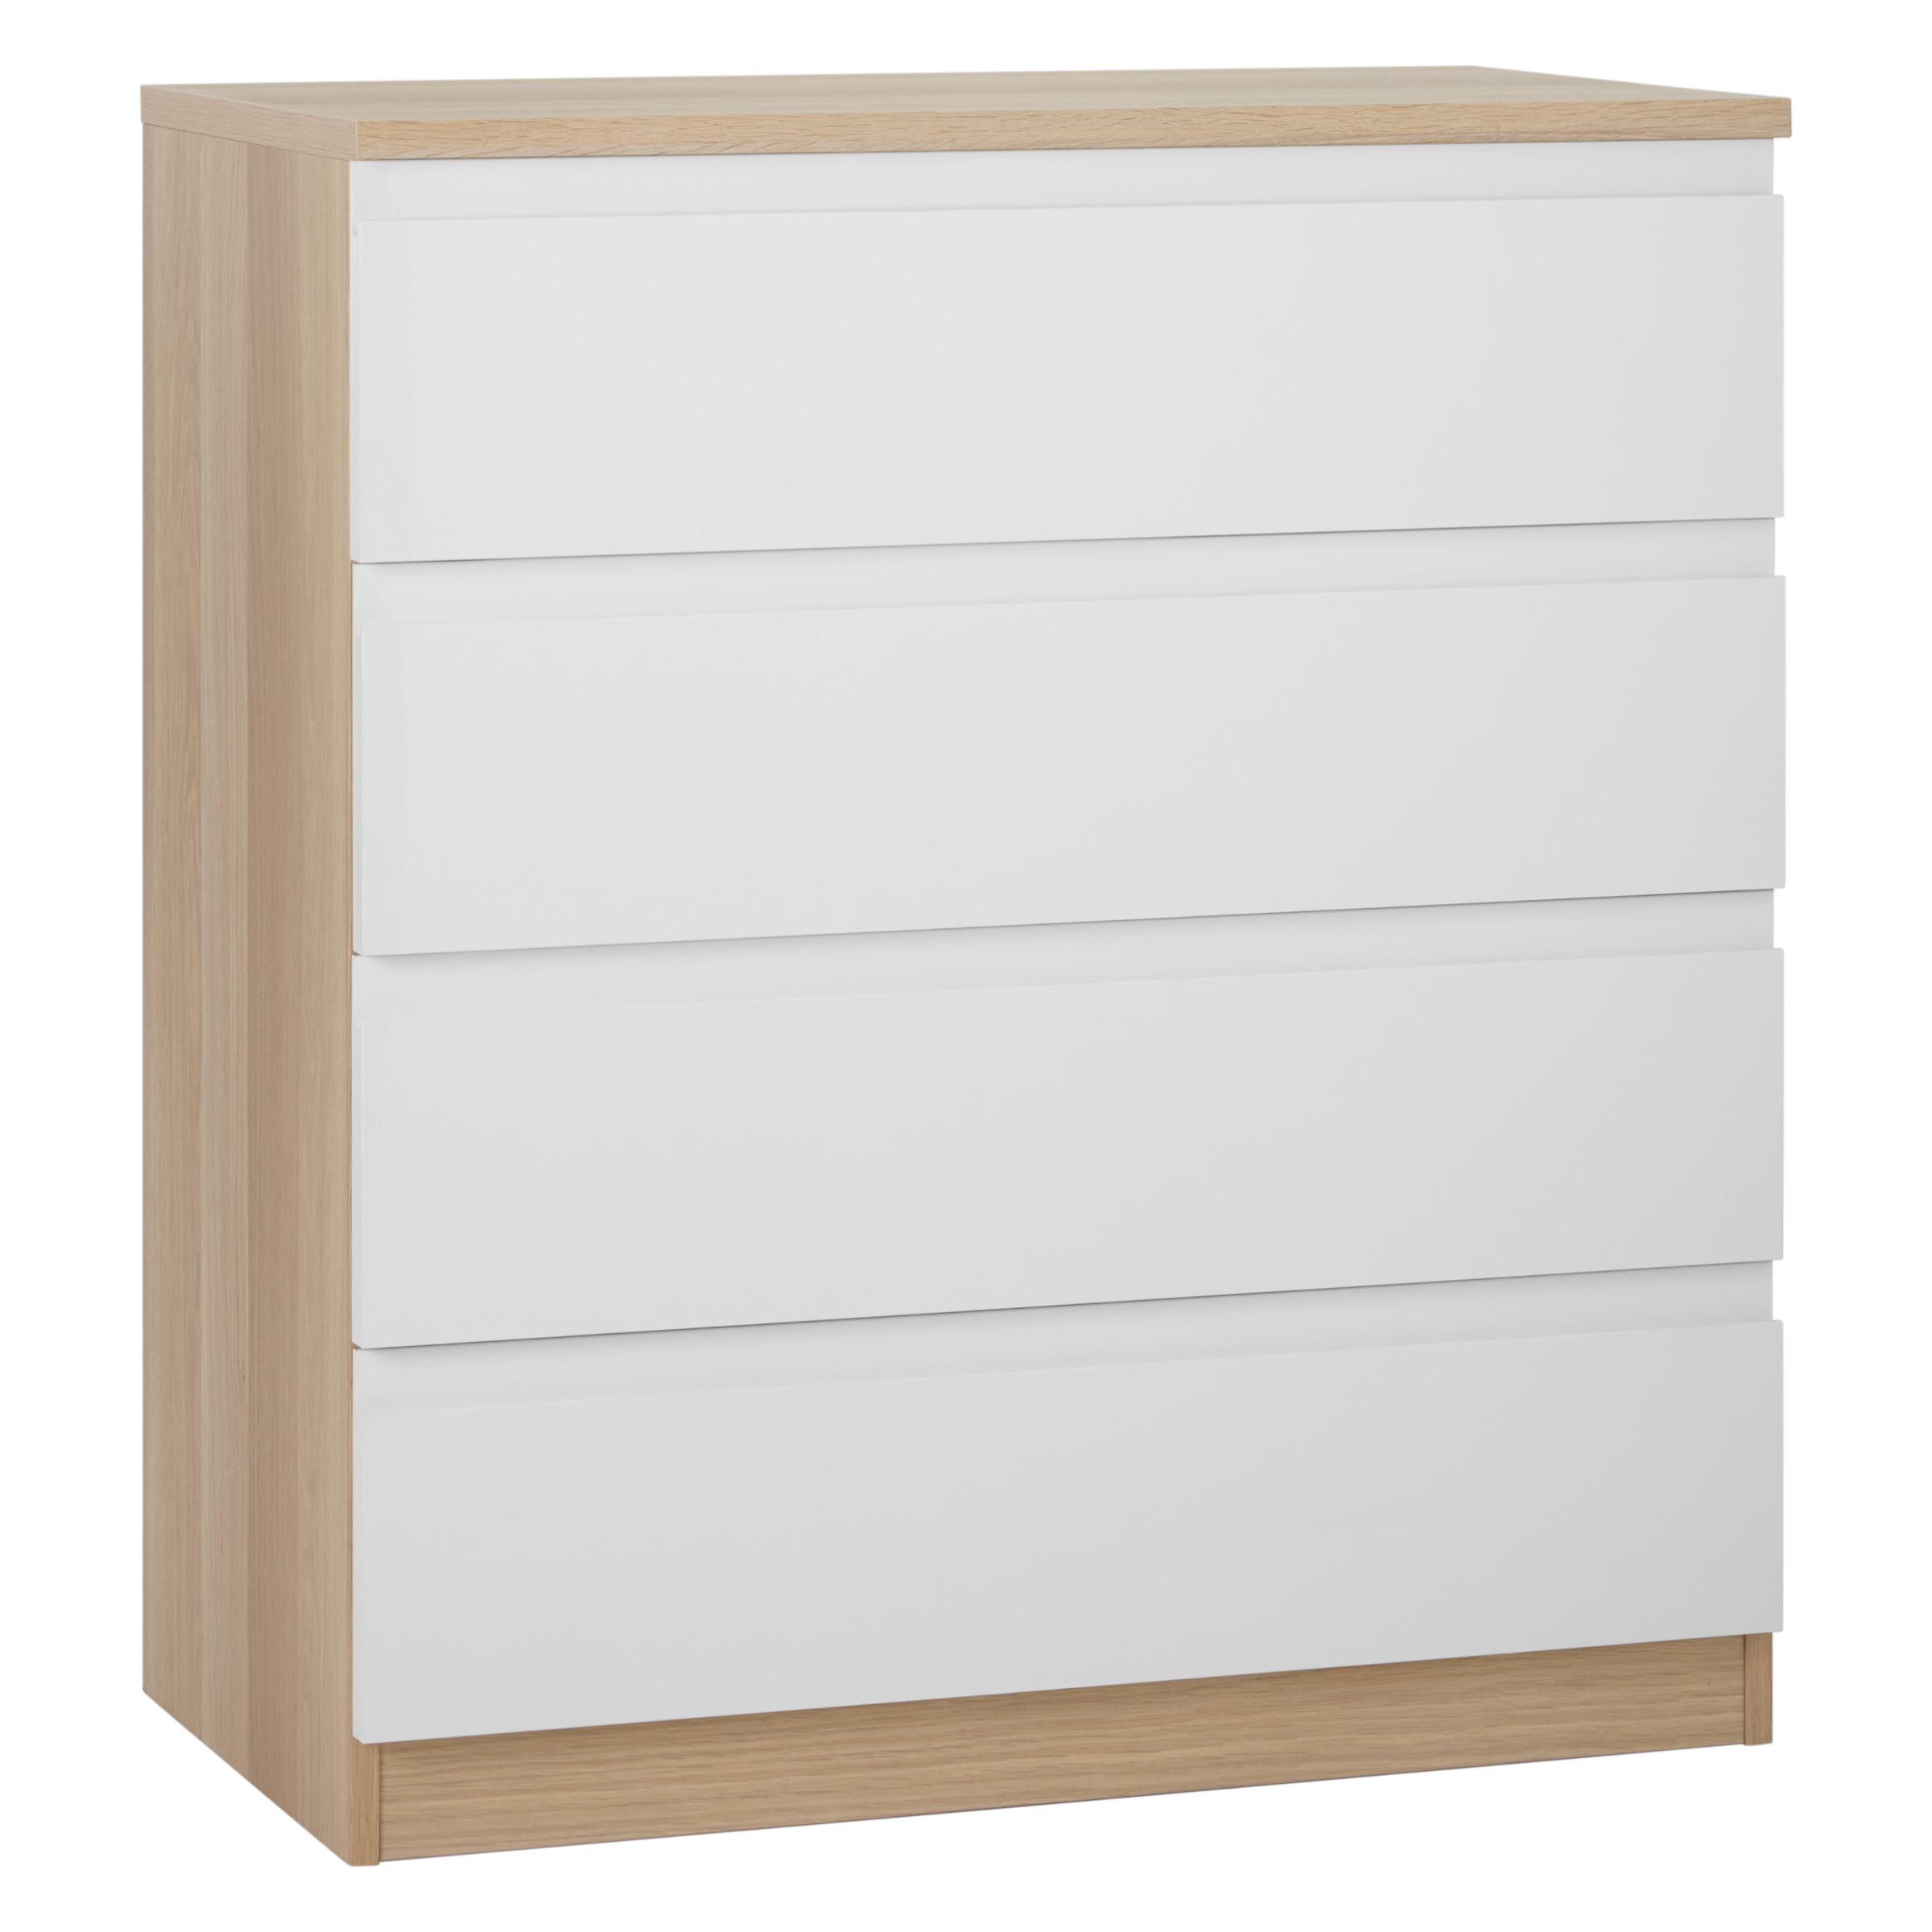 Photo of John lewis anyday mix it wide 4 drawer chest gloss white/natural oak